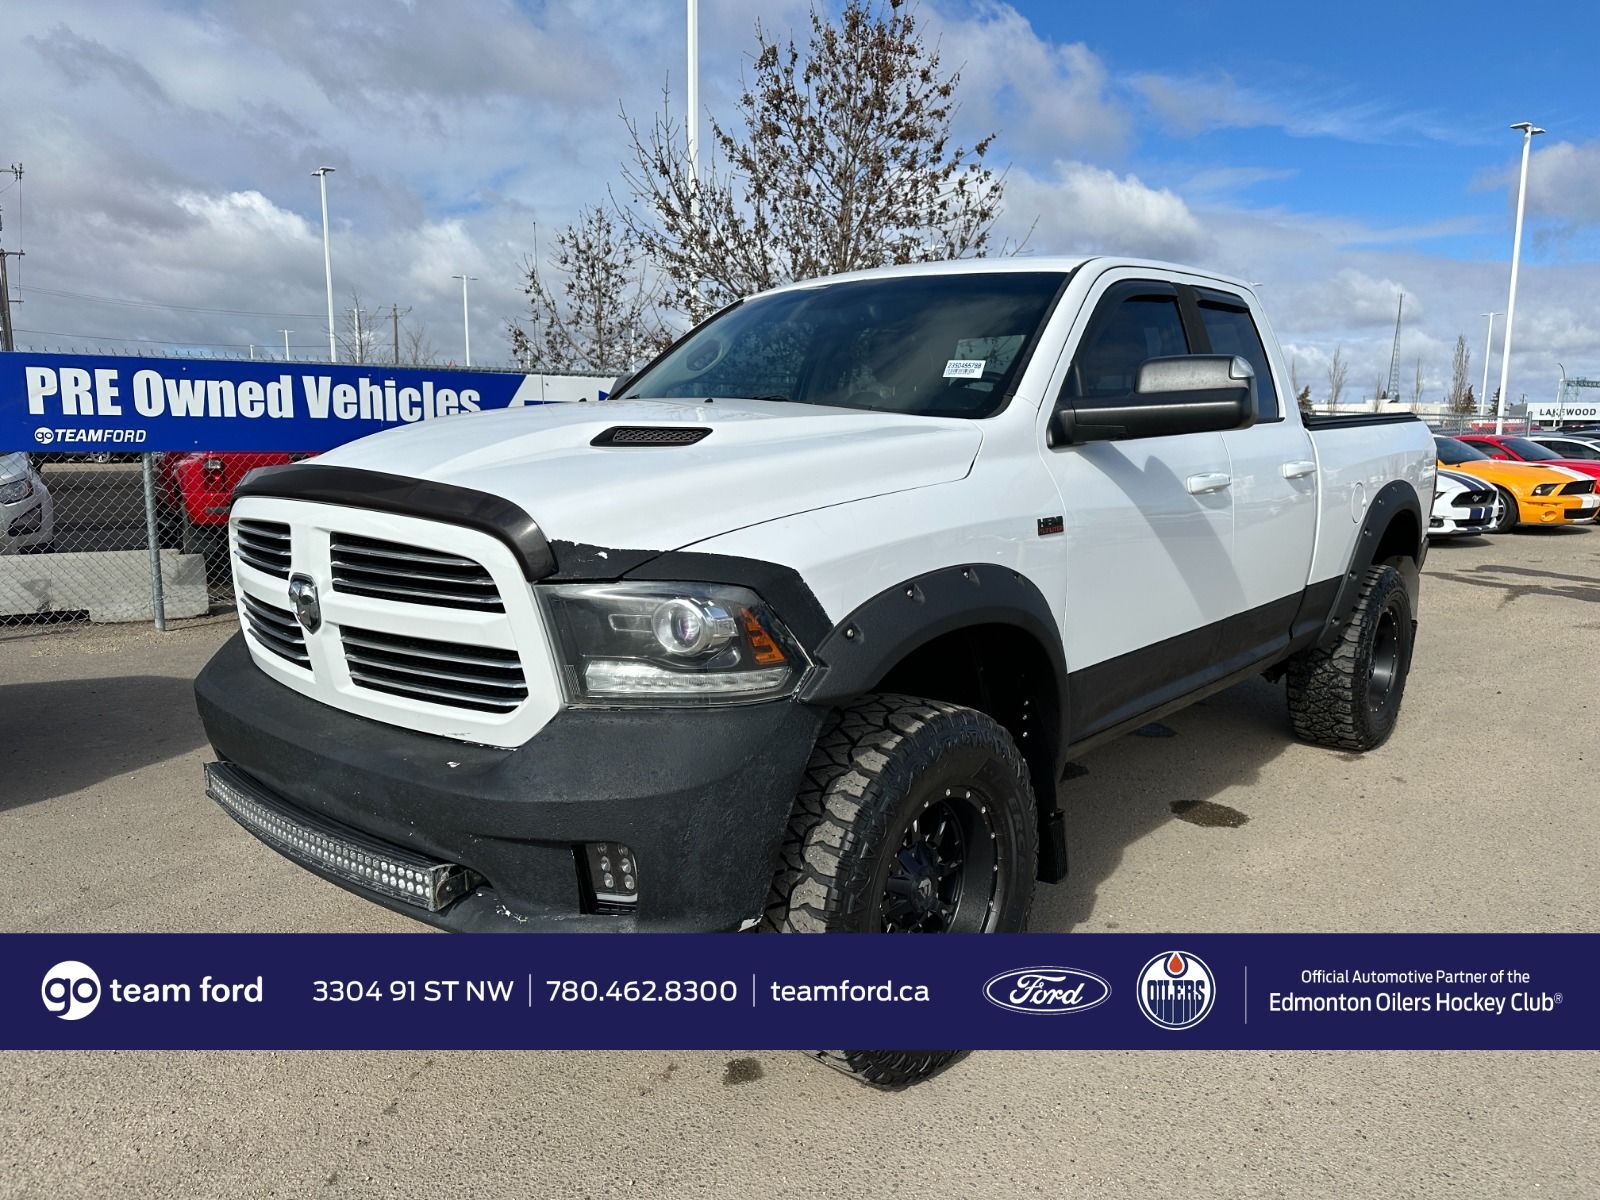 2013 Ram 1500 SPORT-4X4, CREWCAB, POWER OPTIONS AND MUCH MORE!!